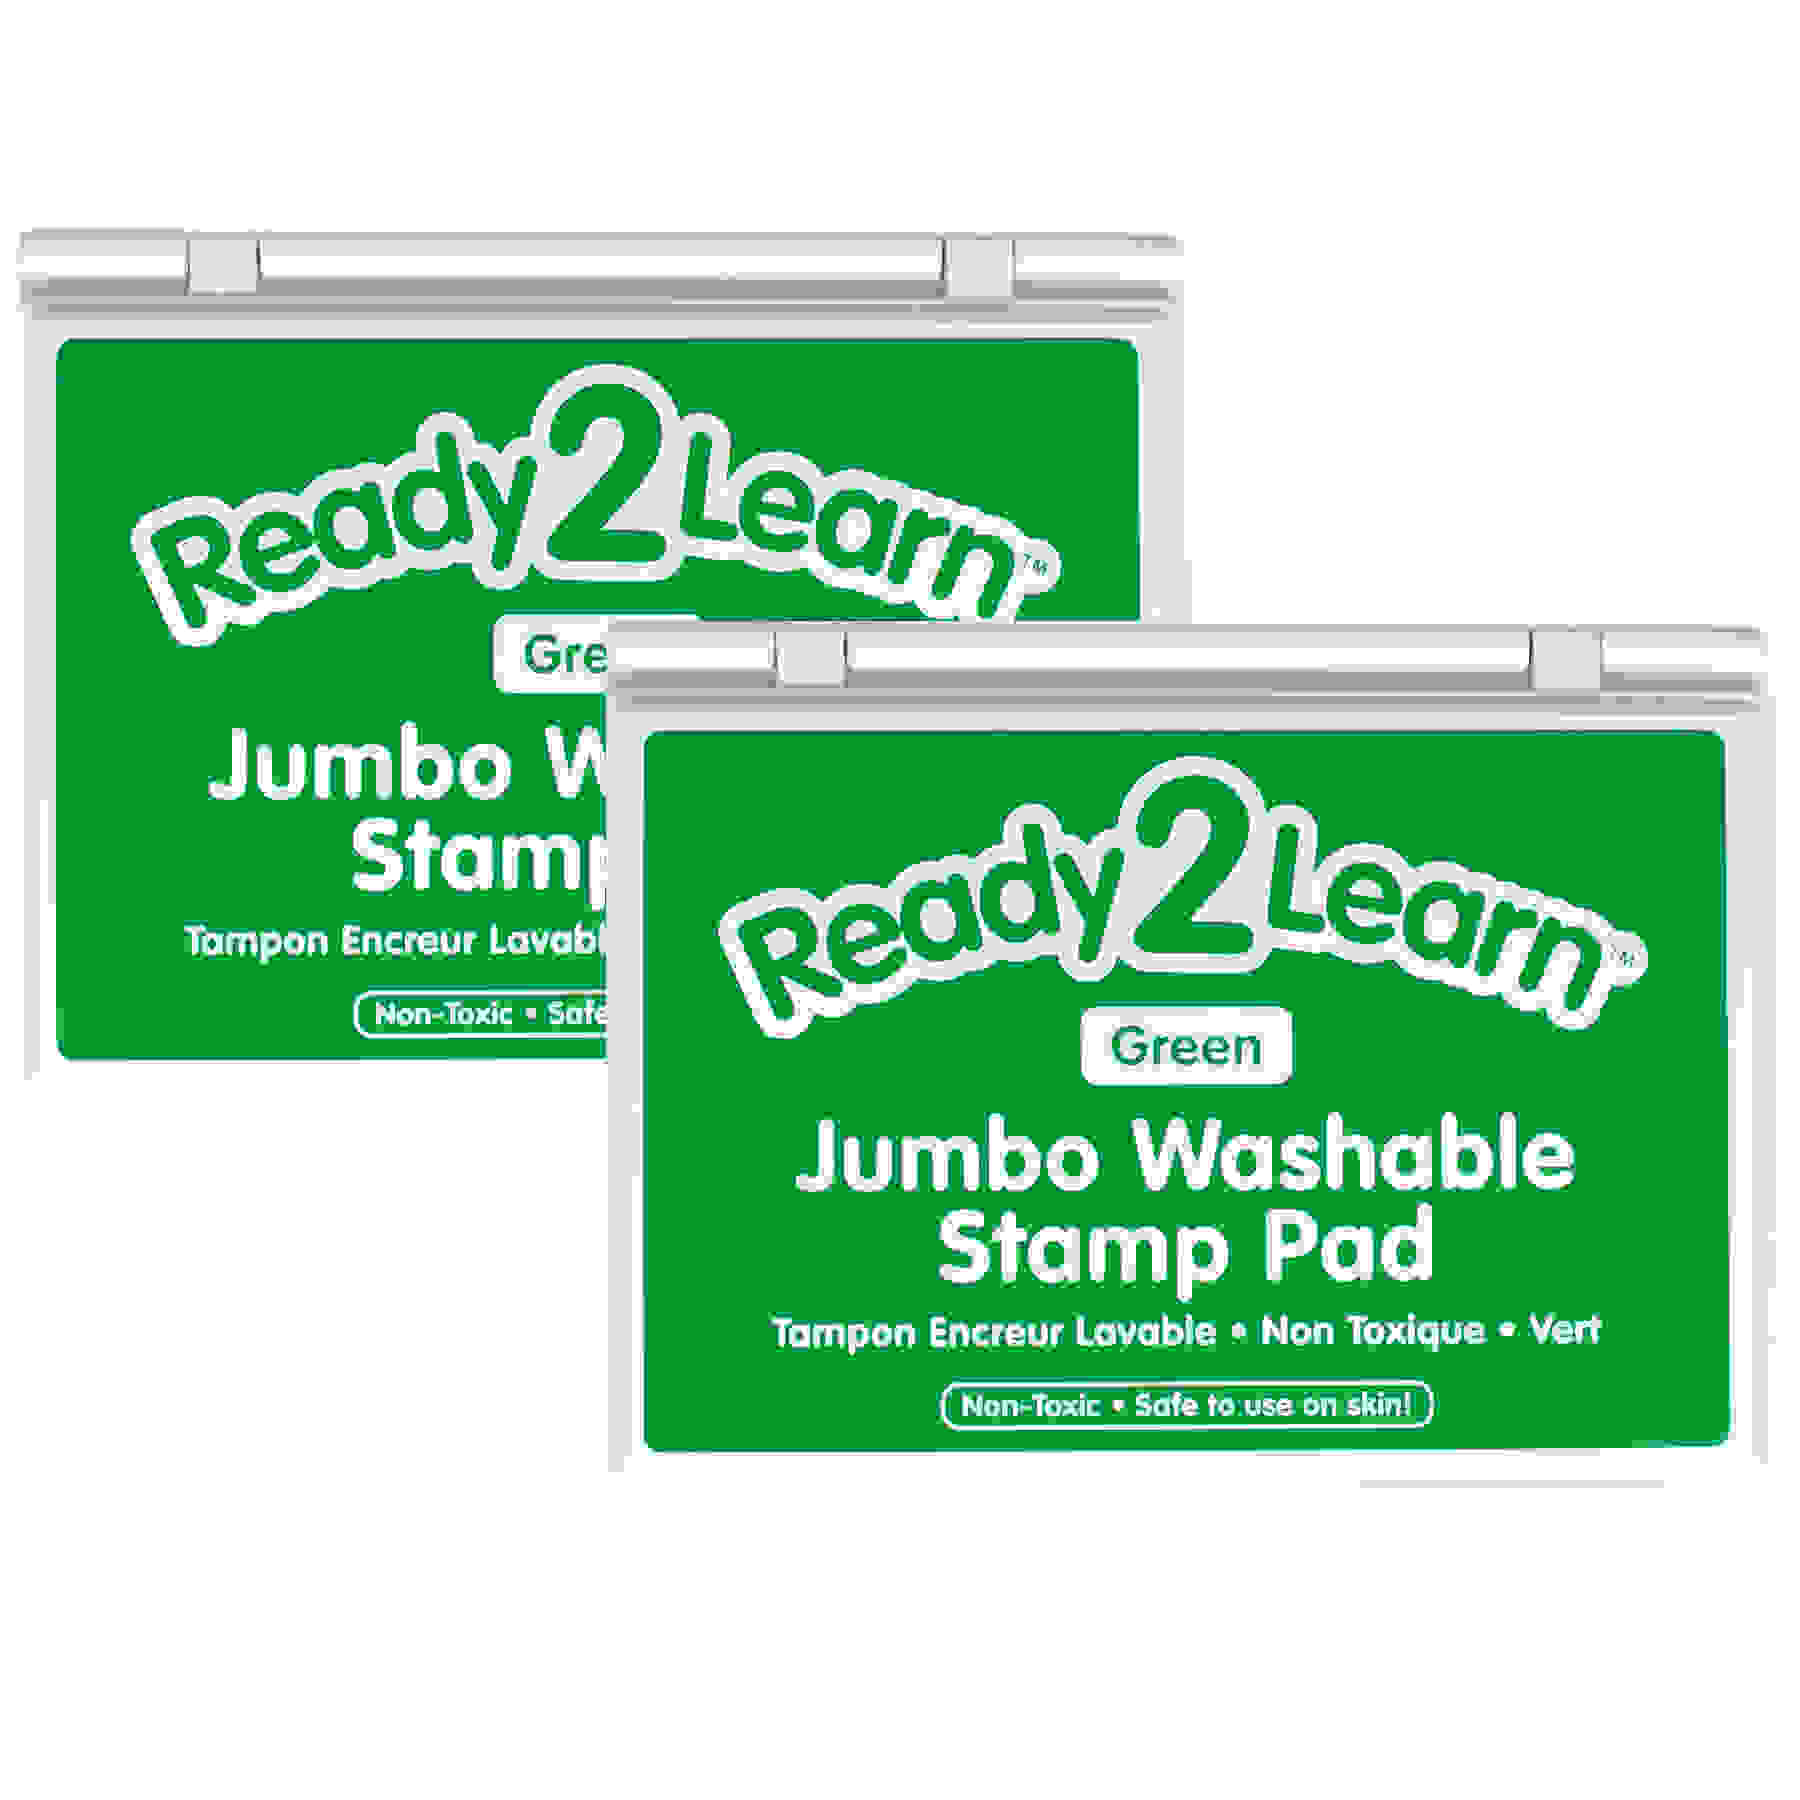 Jumbo Washable Stamp Pad - Green - Pack of 2